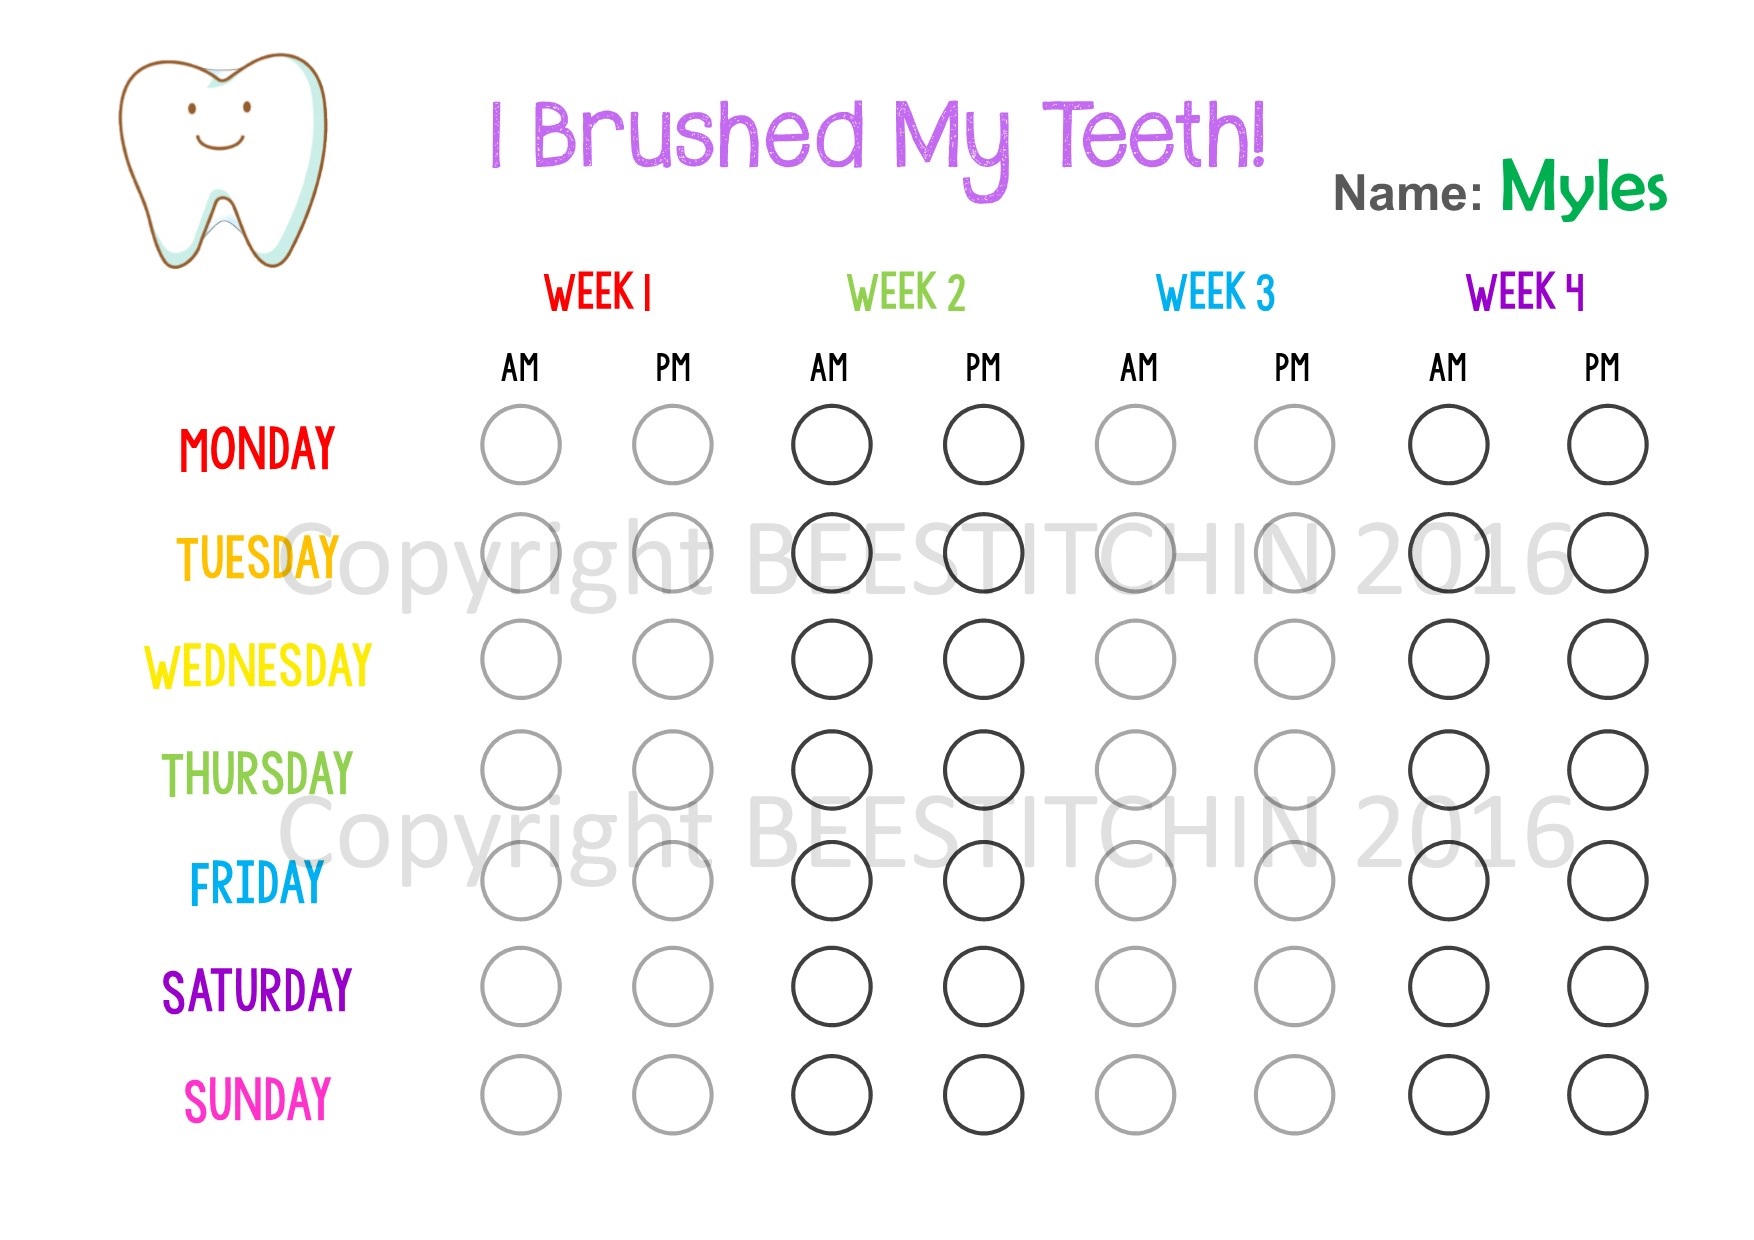 Teeth Cleaning Sticker Chart